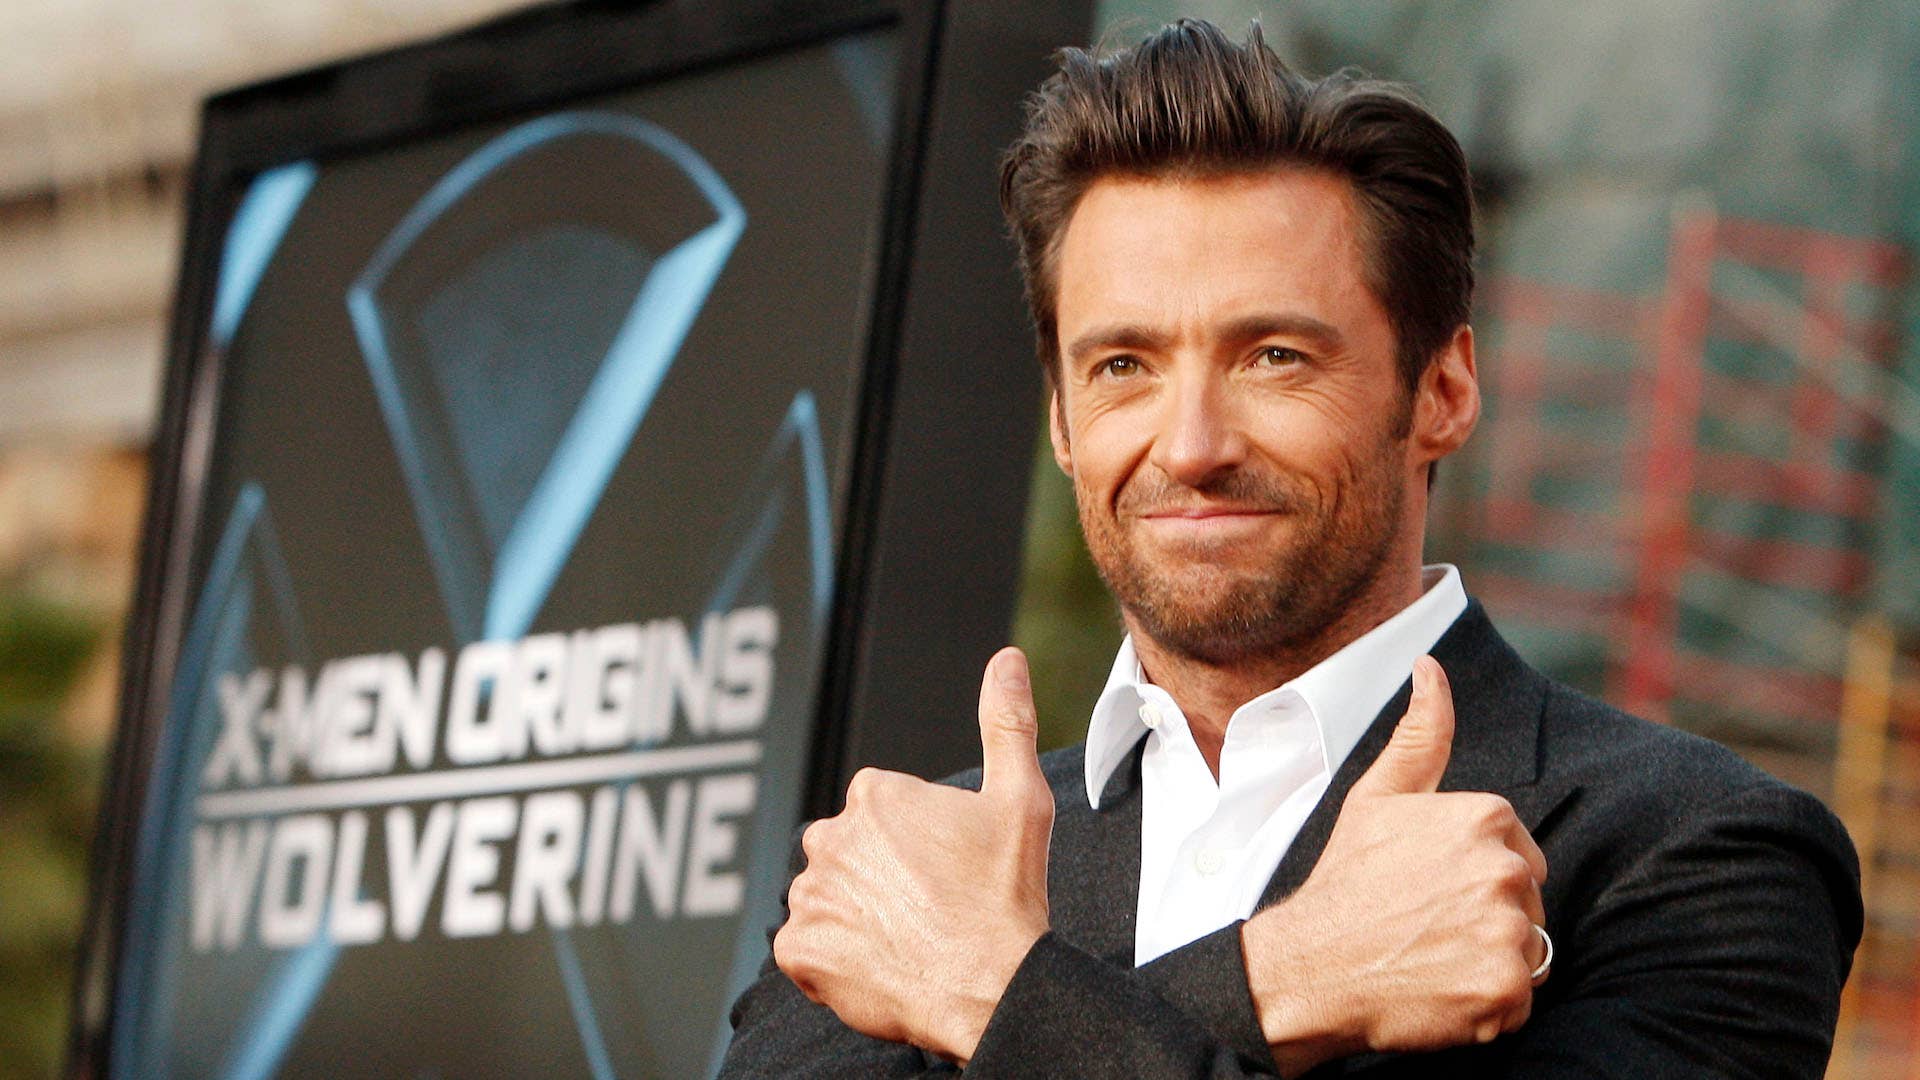 This is an image of Hugh Jackman